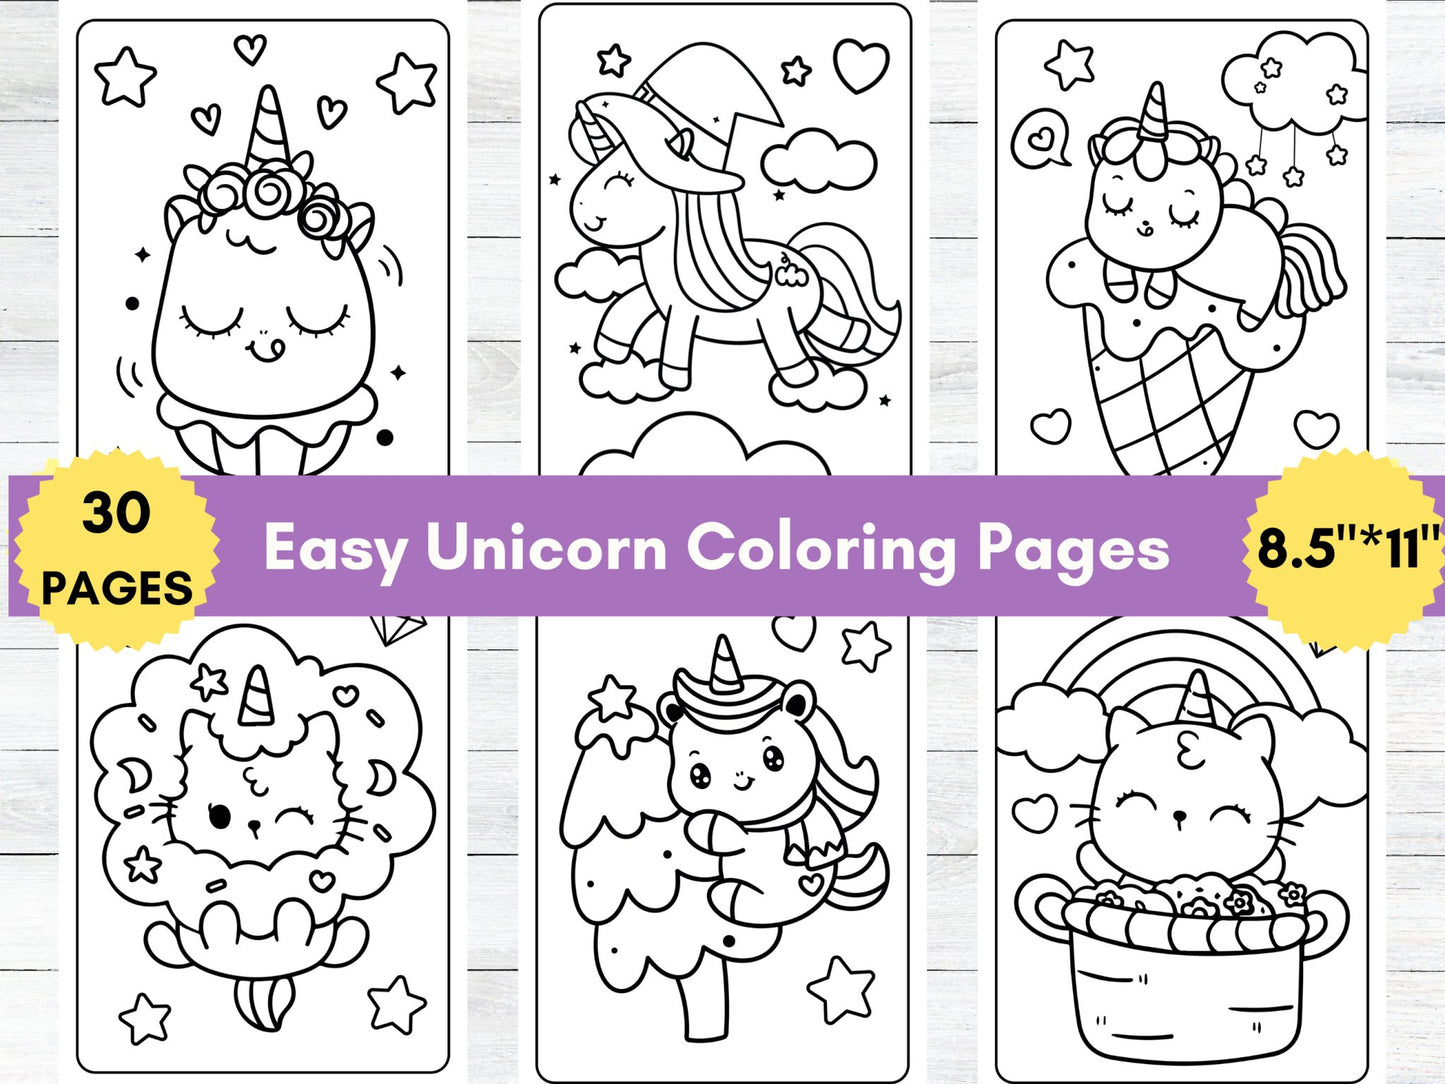 30 Easy Unicorn Coloring Pages - My Coloring Zone